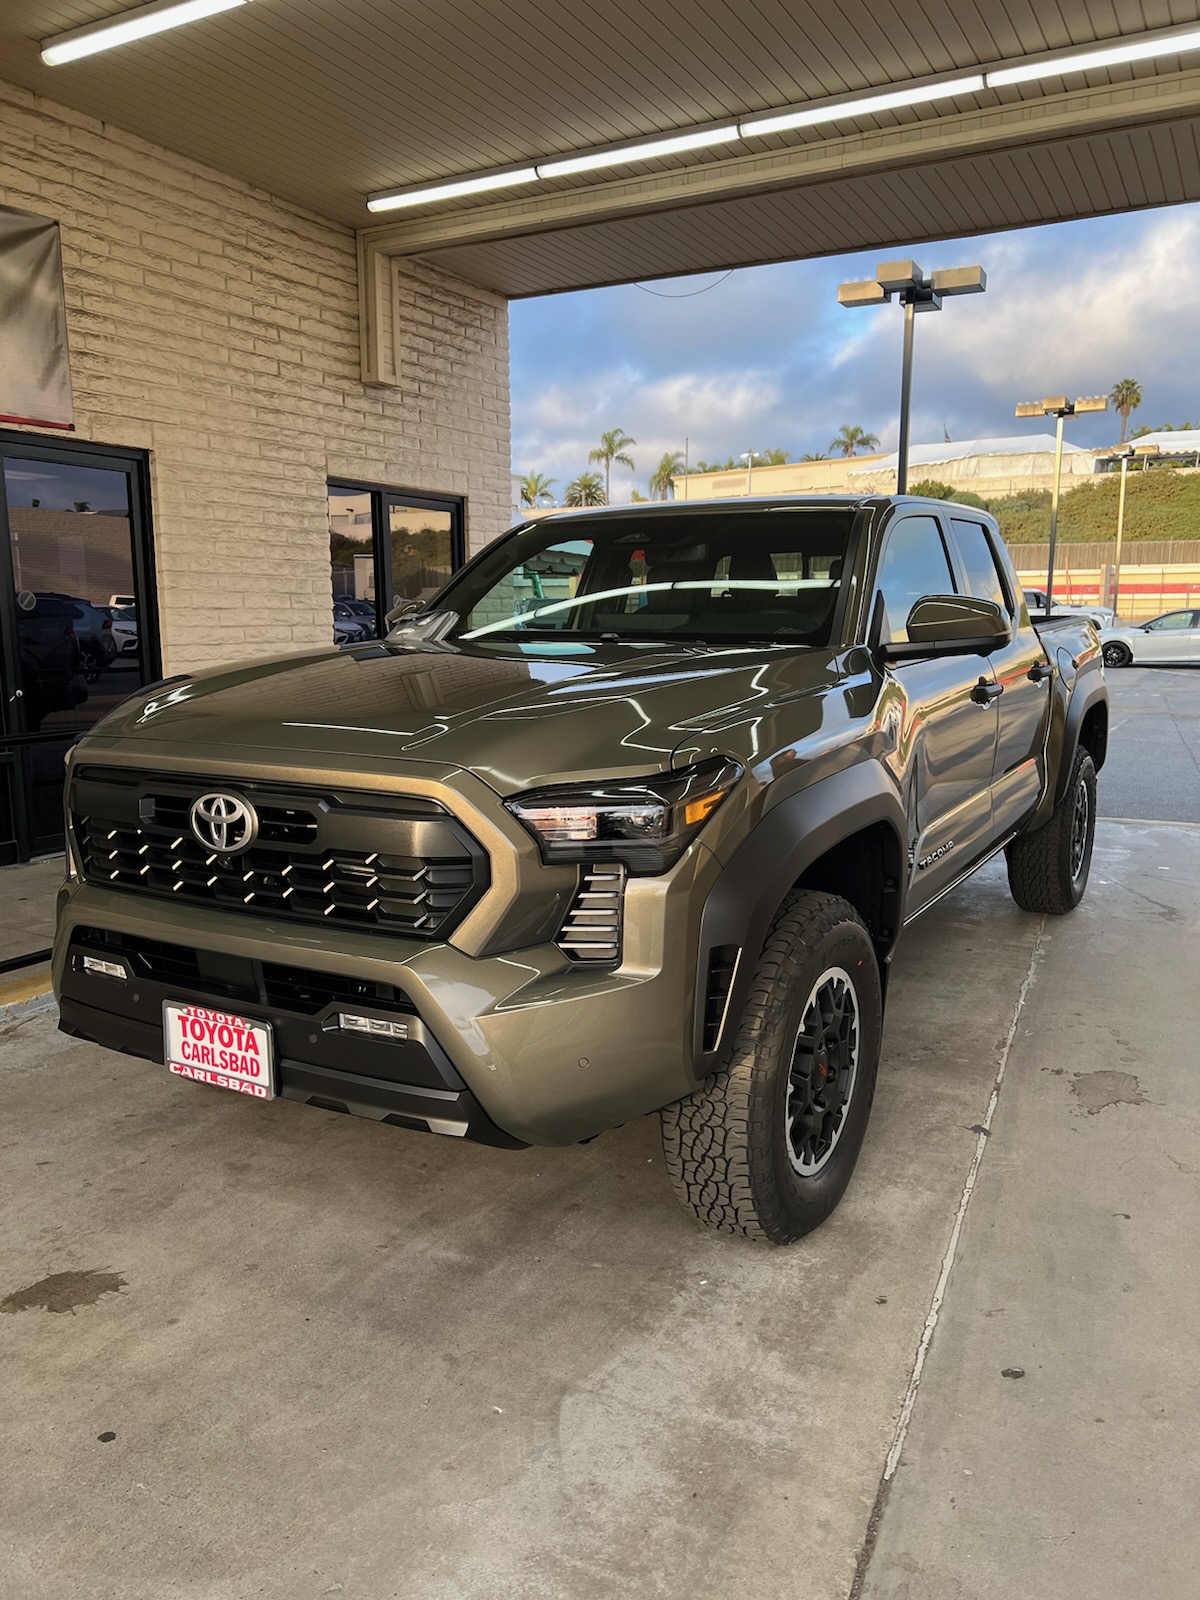 2024 Tacoma 2024 Tacoma TRD Off-Road in Bronze Oxide spotted IMG_4583